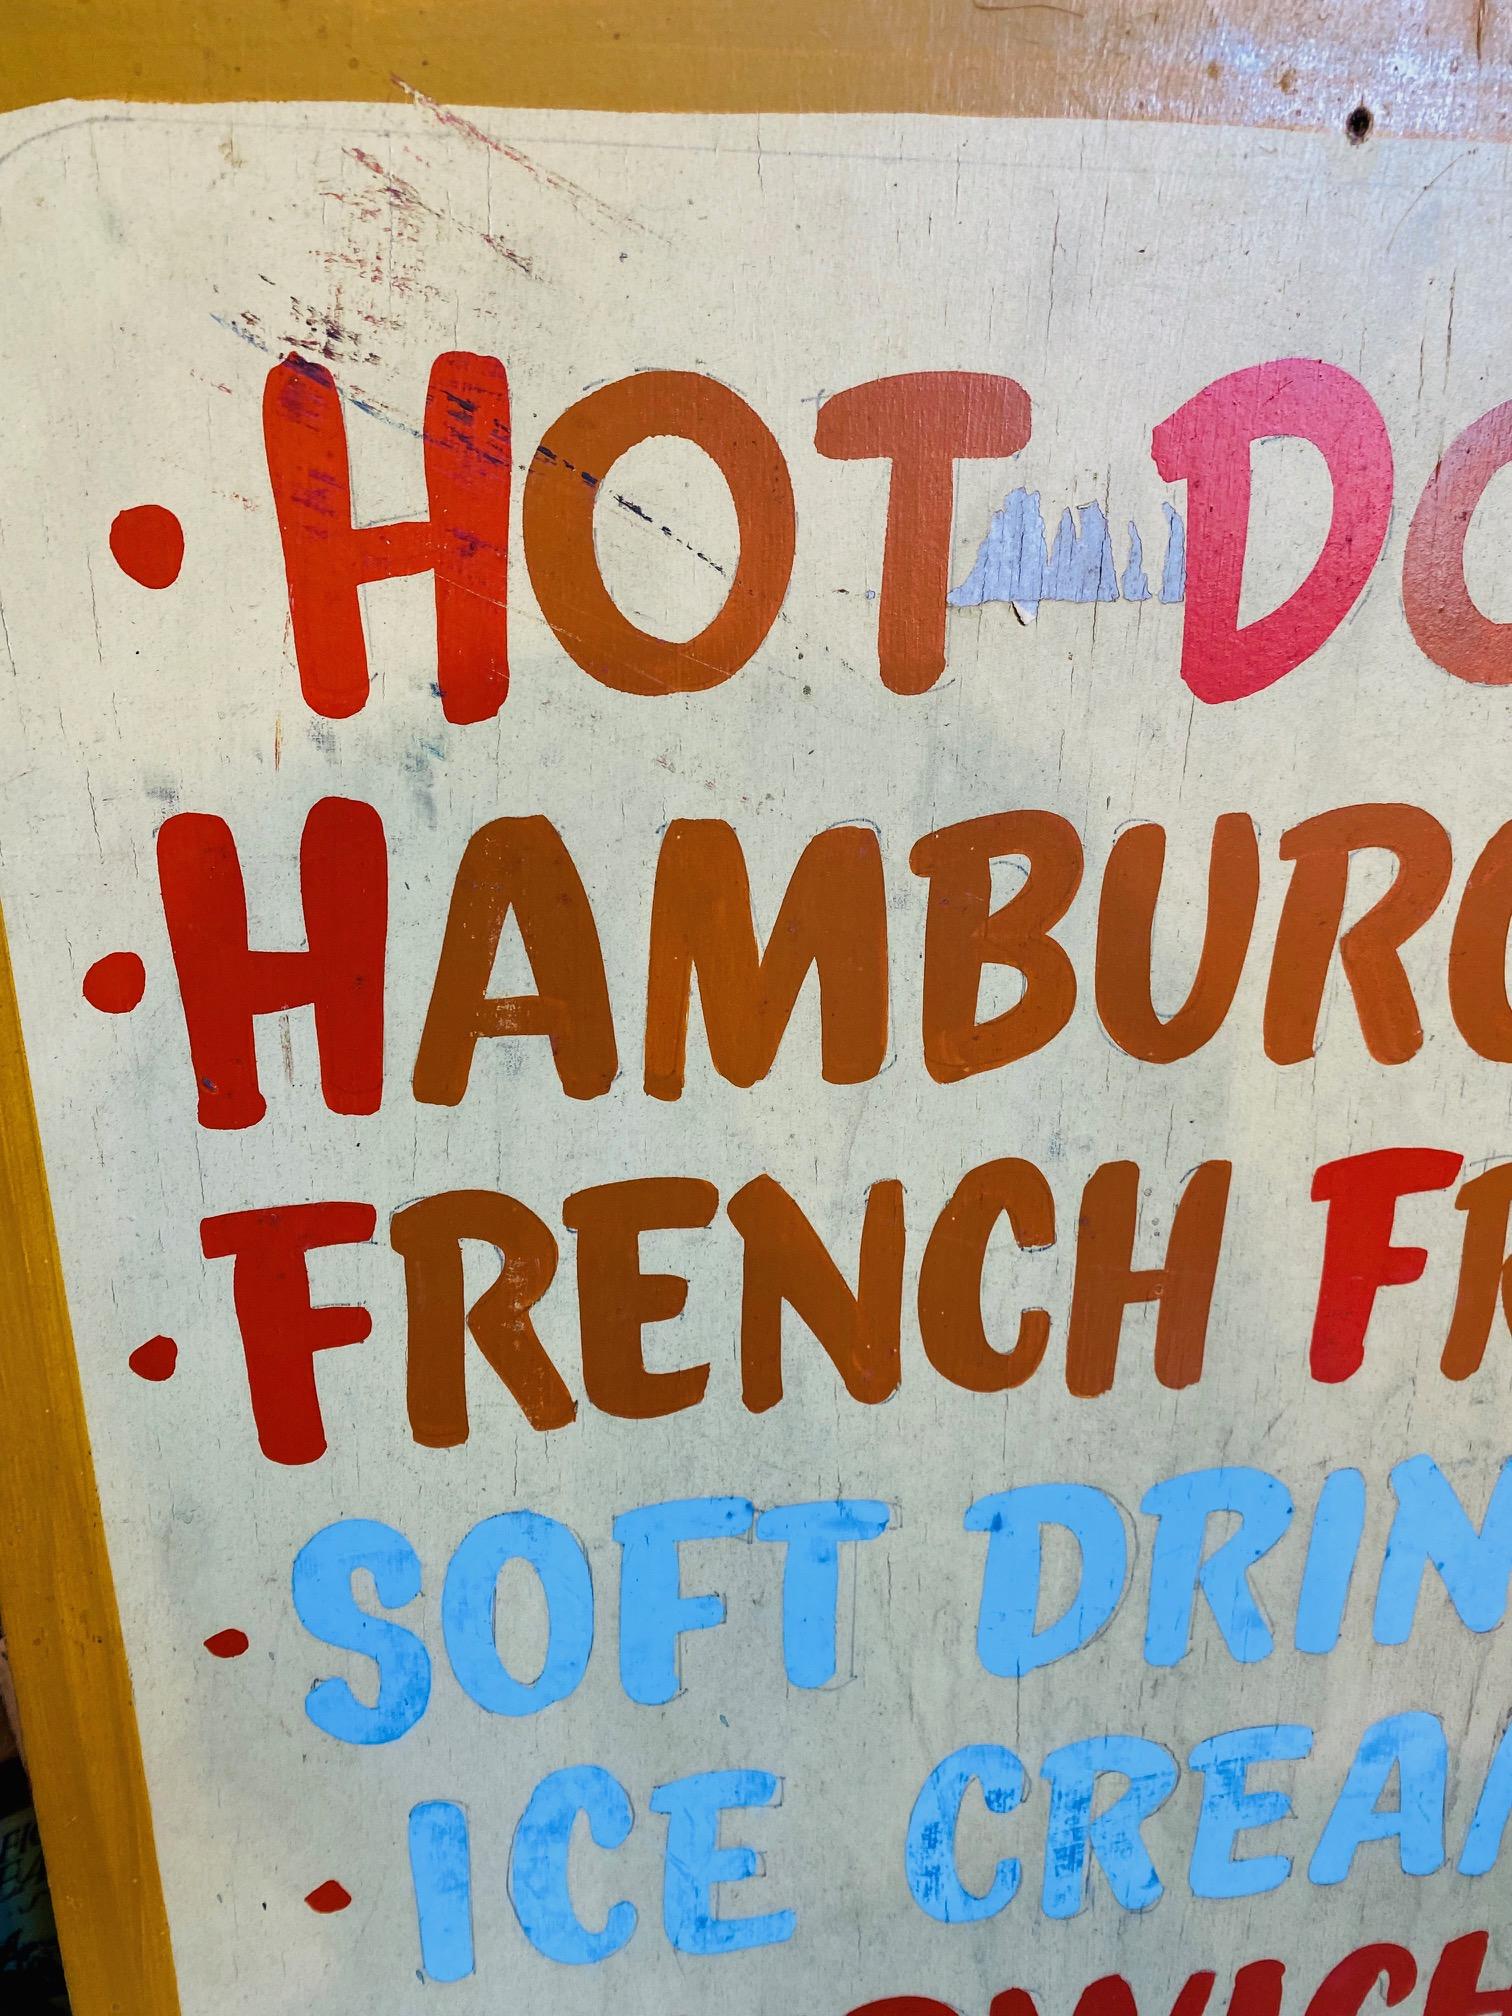 Vintage mid century beach-side hamburger shack menu board, circa 1950s, hand painted on plywood advertising hot dogs and hamburgers and the usual suspects... plus sunglasses. And Bathers are welcome!

Sign remains in very good weathered condition.